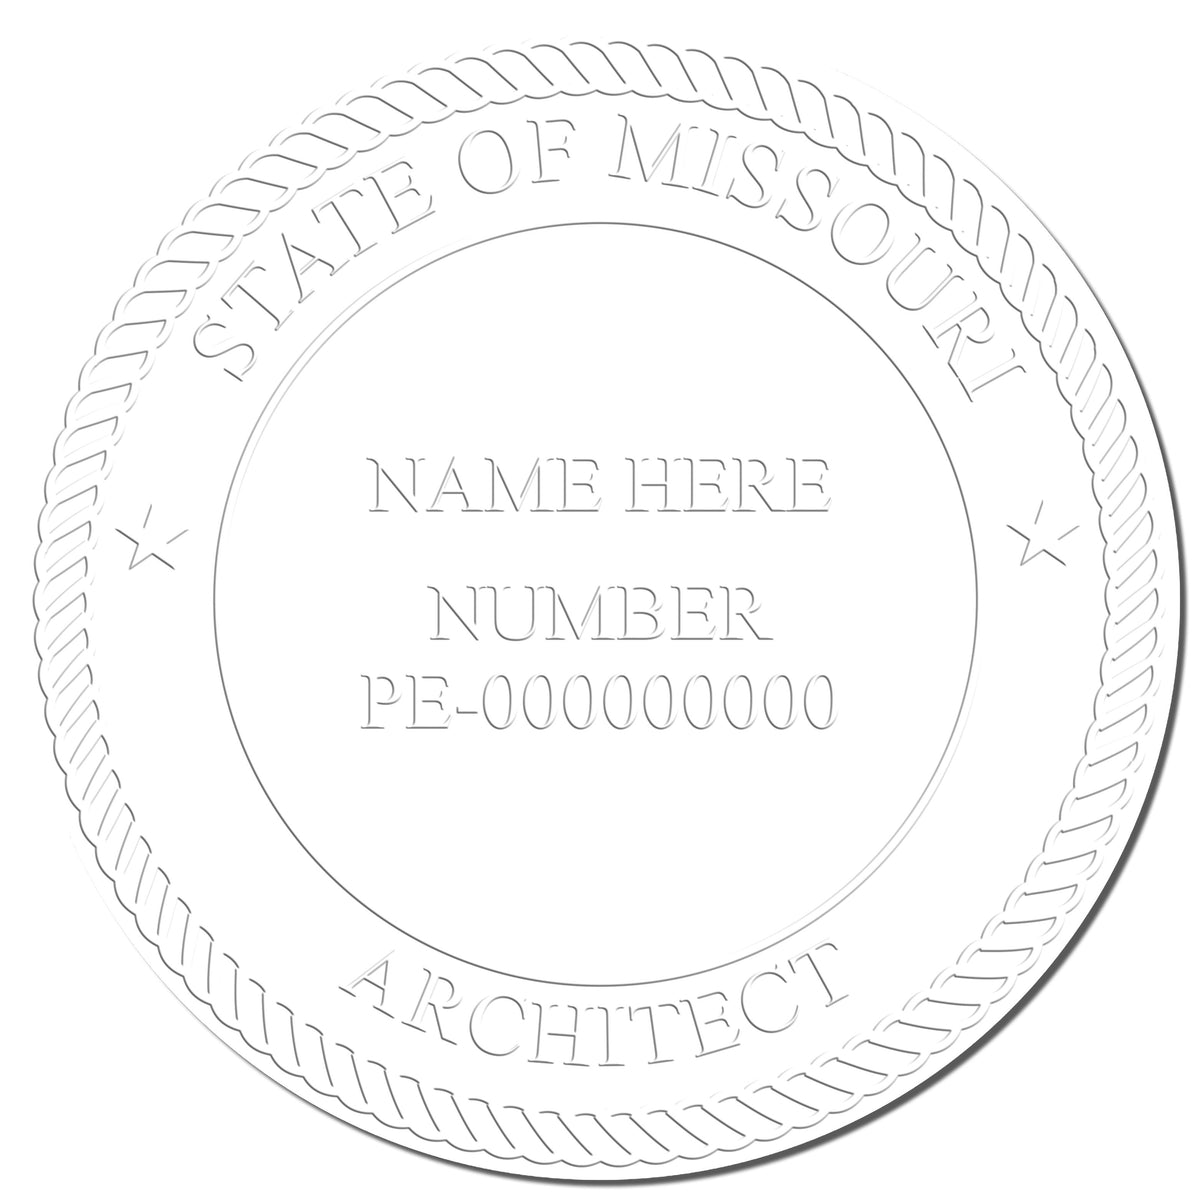 This paper is stamped with a sample imprint of the State of Missouri Architectural Seal Embosser, signifying its quality and reliability.